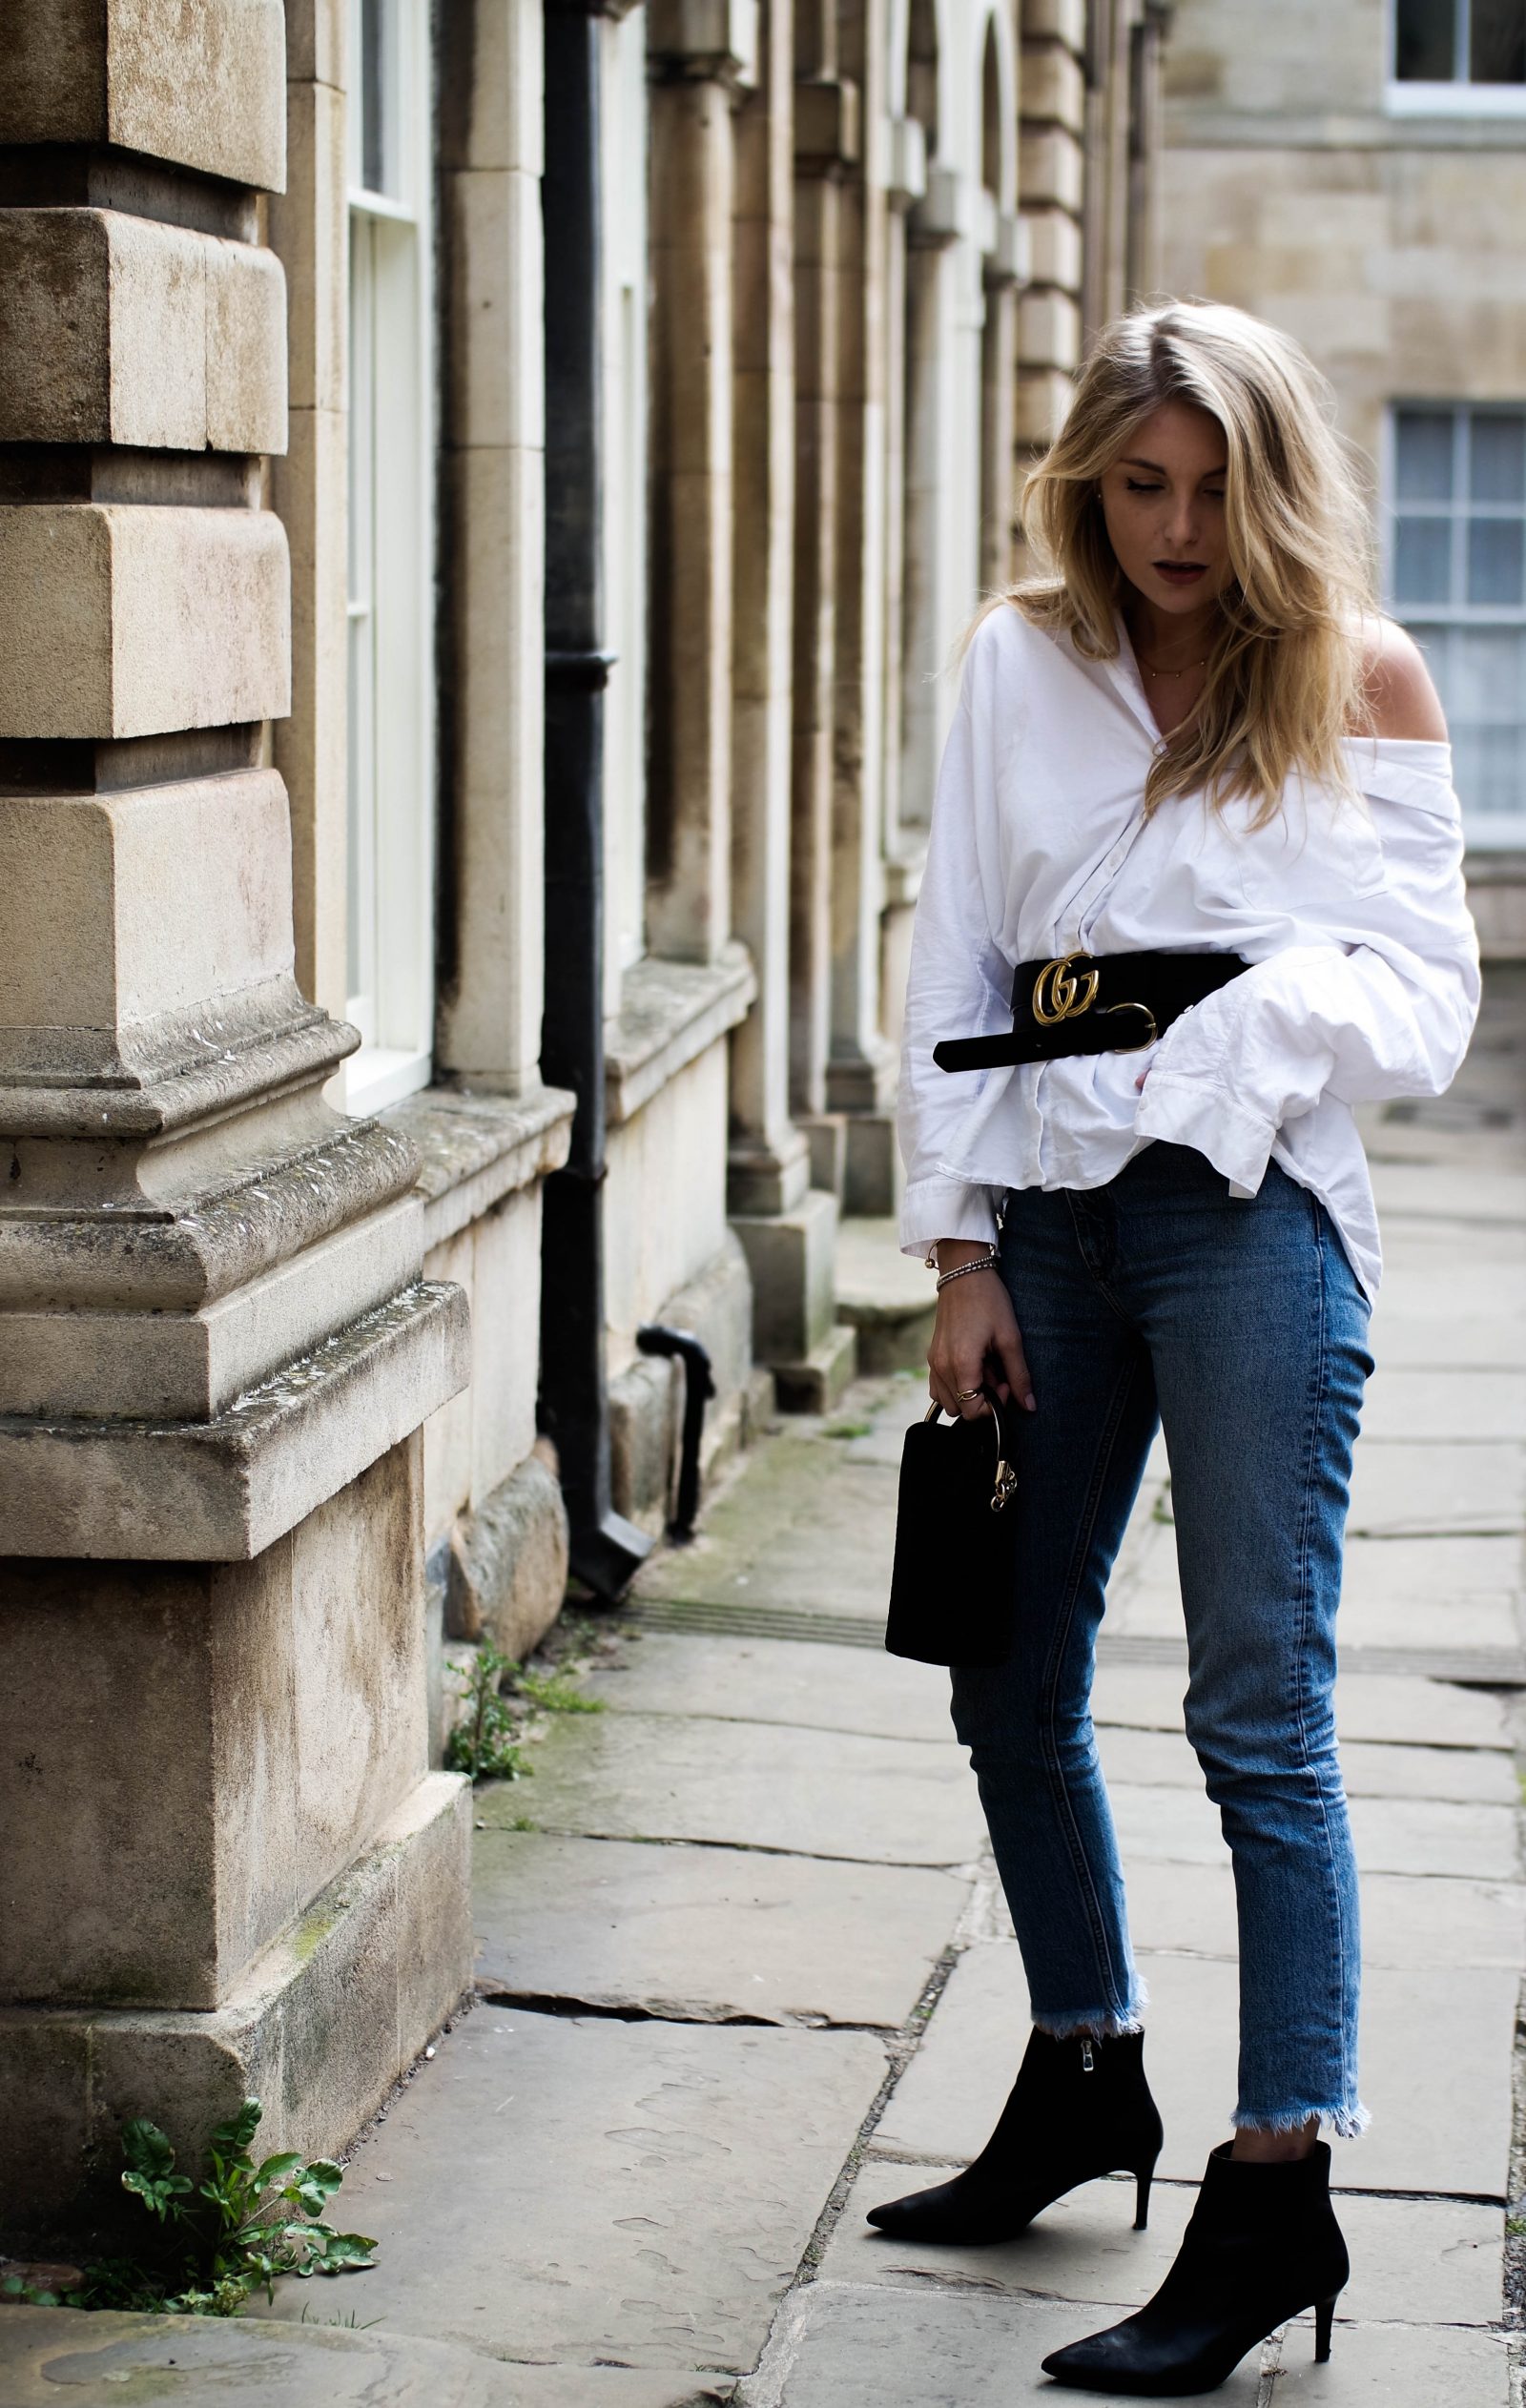 The New Way To Wear Your Statement Belt - Layering Your Belts 